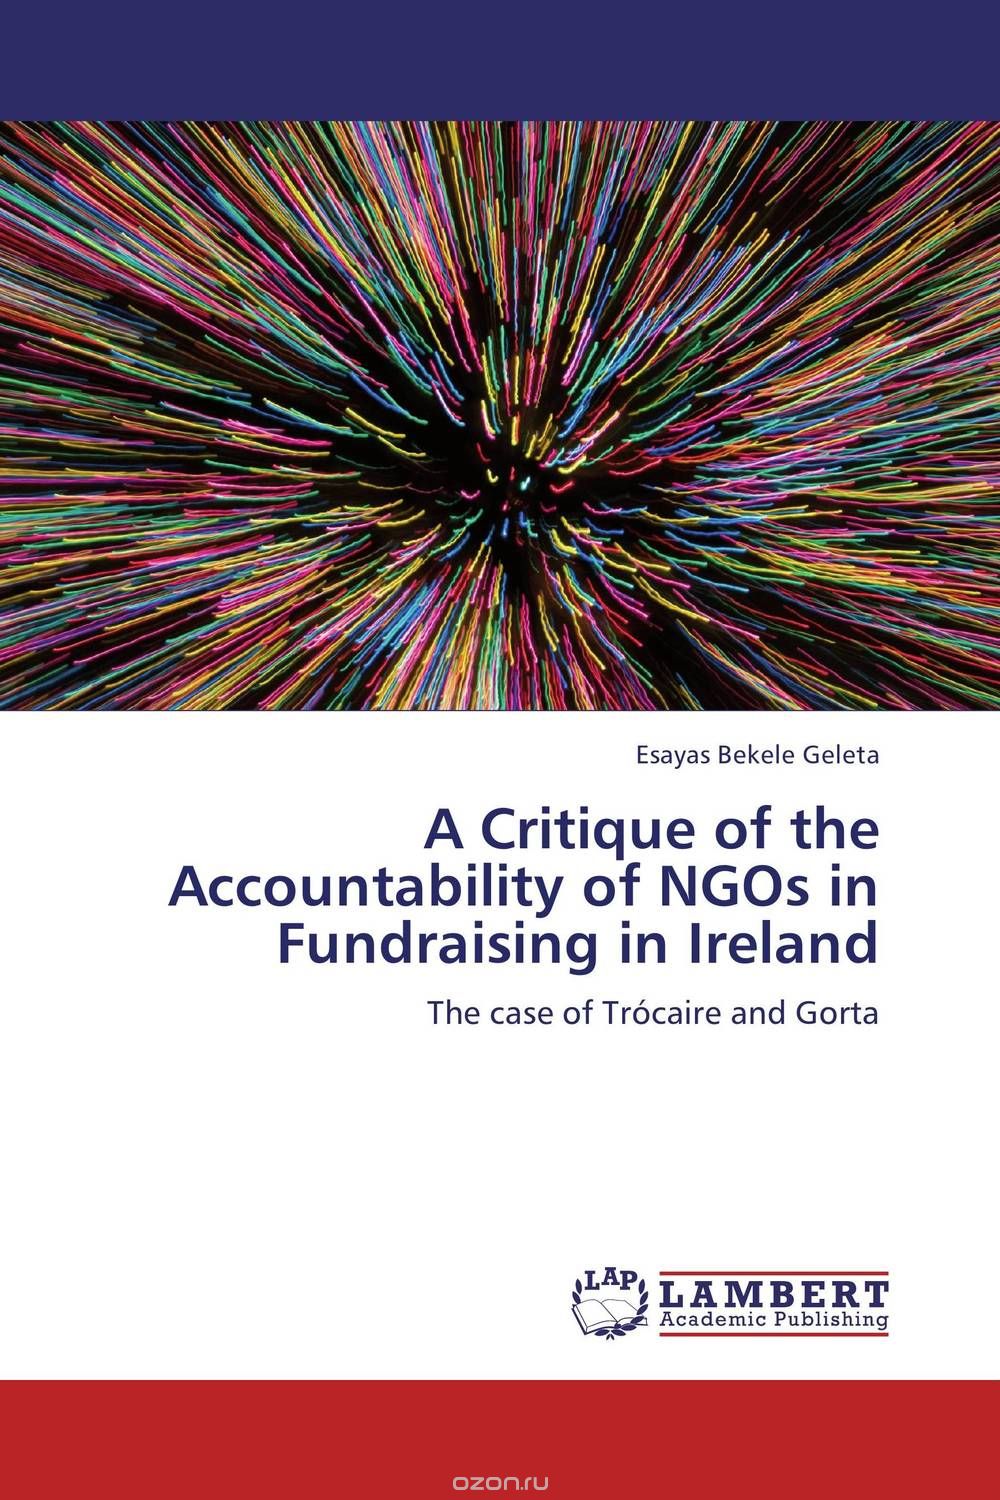 A Critique of the Accountability of NGOs in Fundraising in Ireland